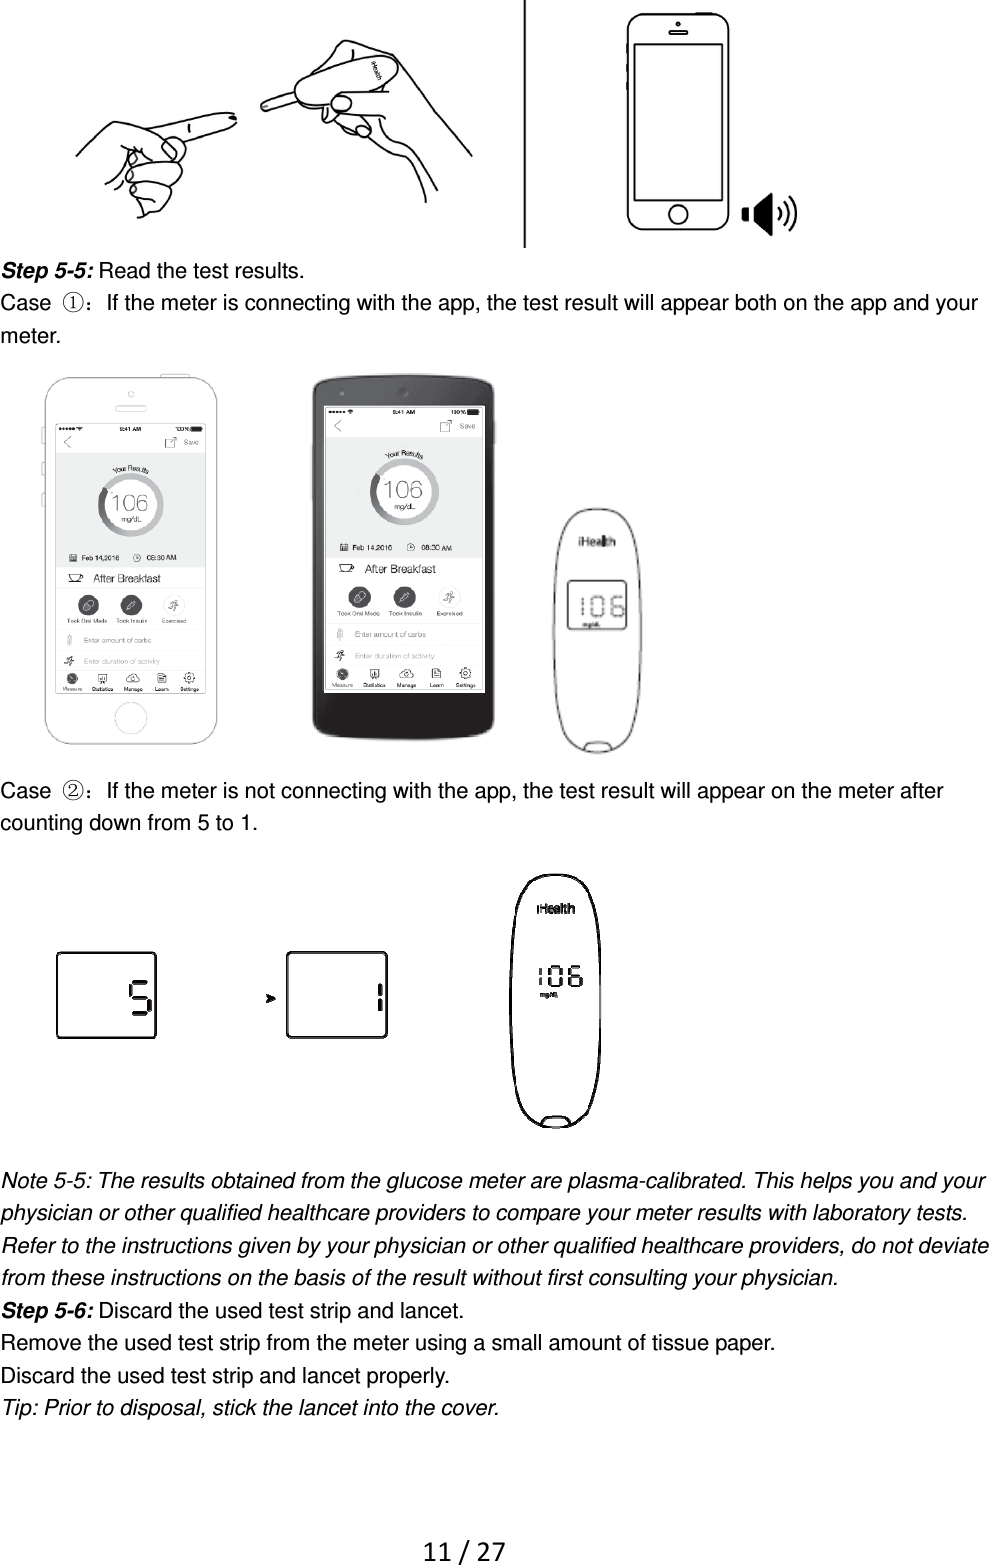   11 / 27  Step 5-5: Read the test results. Case  ①：If the meter is connecting with the app, the test result will appear both on the app and your meter.   Case  ②：If the meter is not connecting with the app, the test result will appear on the meter after counting down from 5 to 1.    Note 5-5: The results obtained from the glucose meter are plasma-calibrated. This helps you and your physician or other qualified healthcare providers to compare your meter results with laboratory tests. Refer to the instructions given by your physician or other qualified healthcare providers, do not deviate from these instructions on the basis of the result without first consulting your physician. Step 5-6: Discard the used test strip and lancet. Remove the used test strip from the meter using a small amount of tissue paper. Discard the used test strip and lancet properly.   Tip: Prior to disposal, stick the lancet into the cover. 